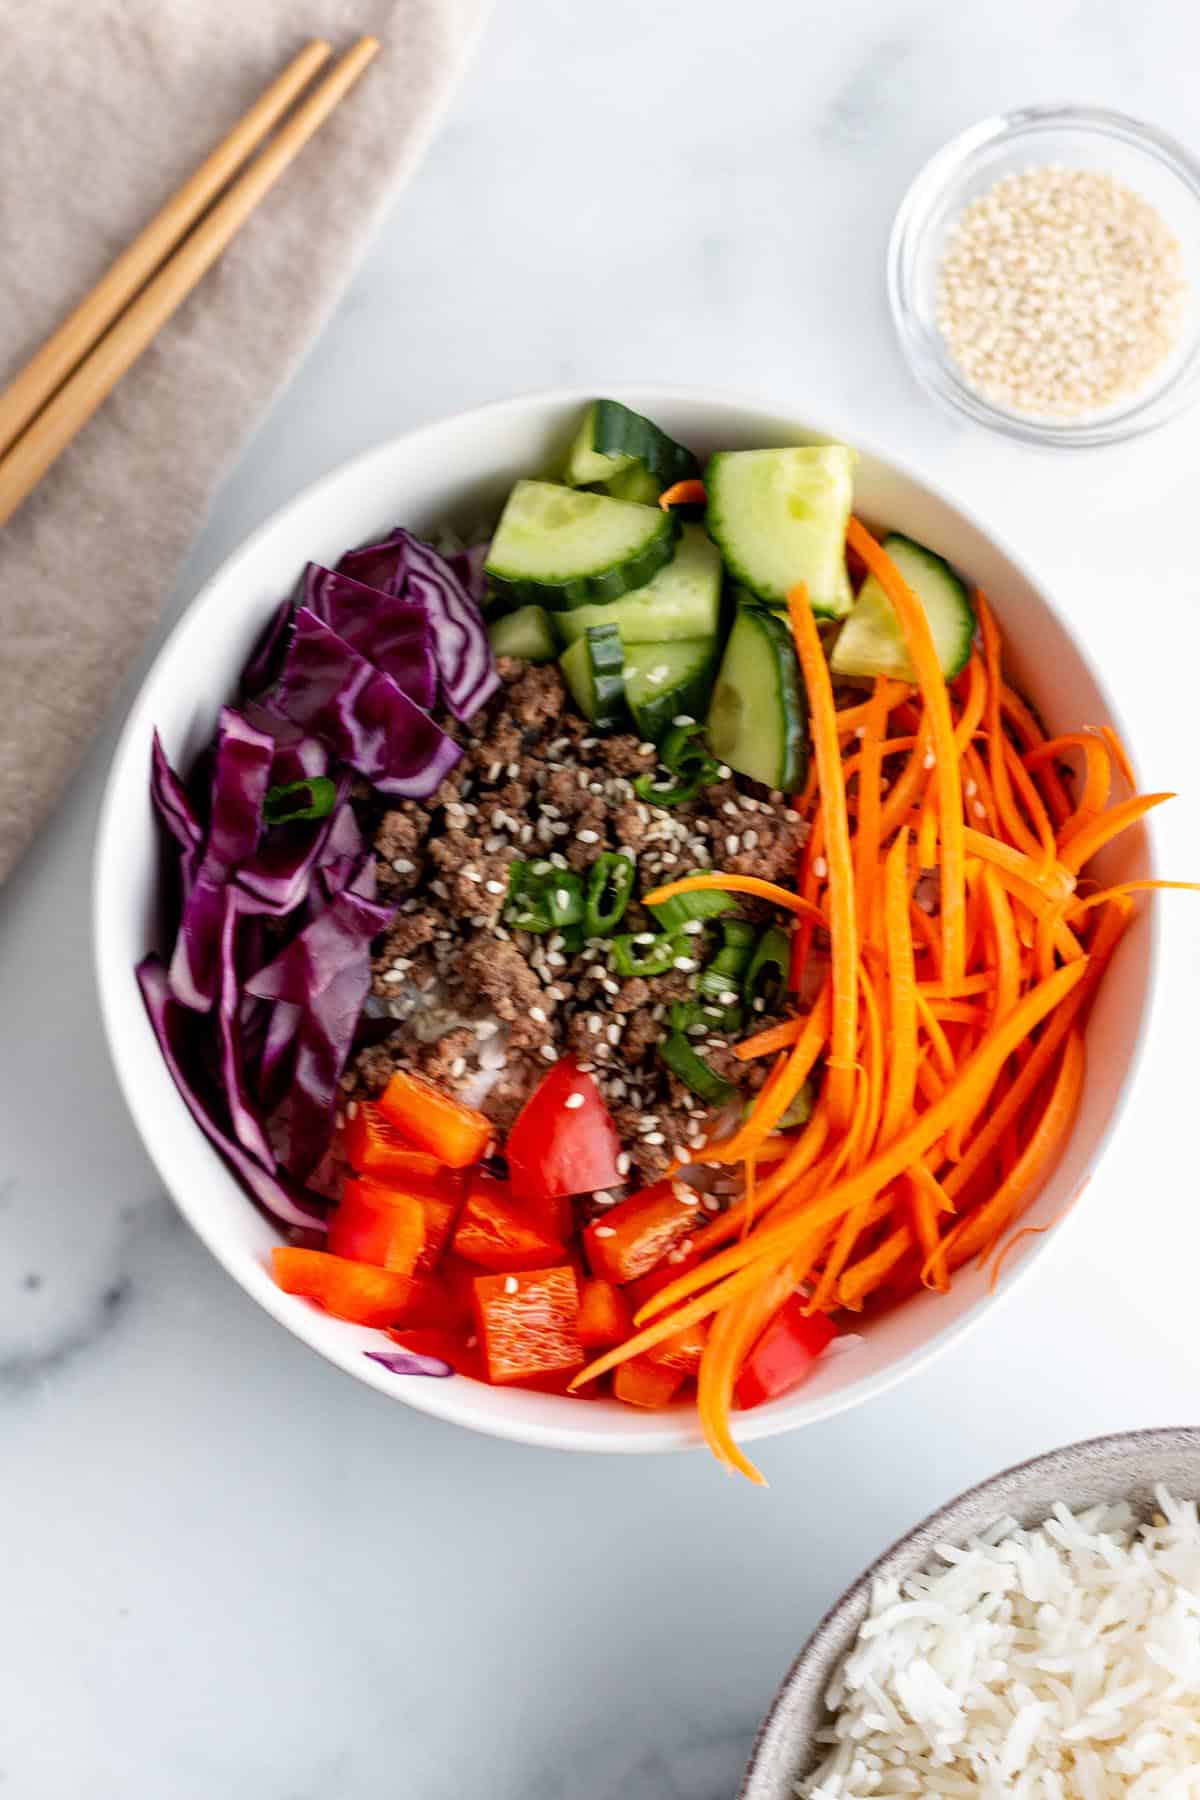 A bowl with julienne carrots, chopped peppers, cabbage, green onion and cooked ground beef.